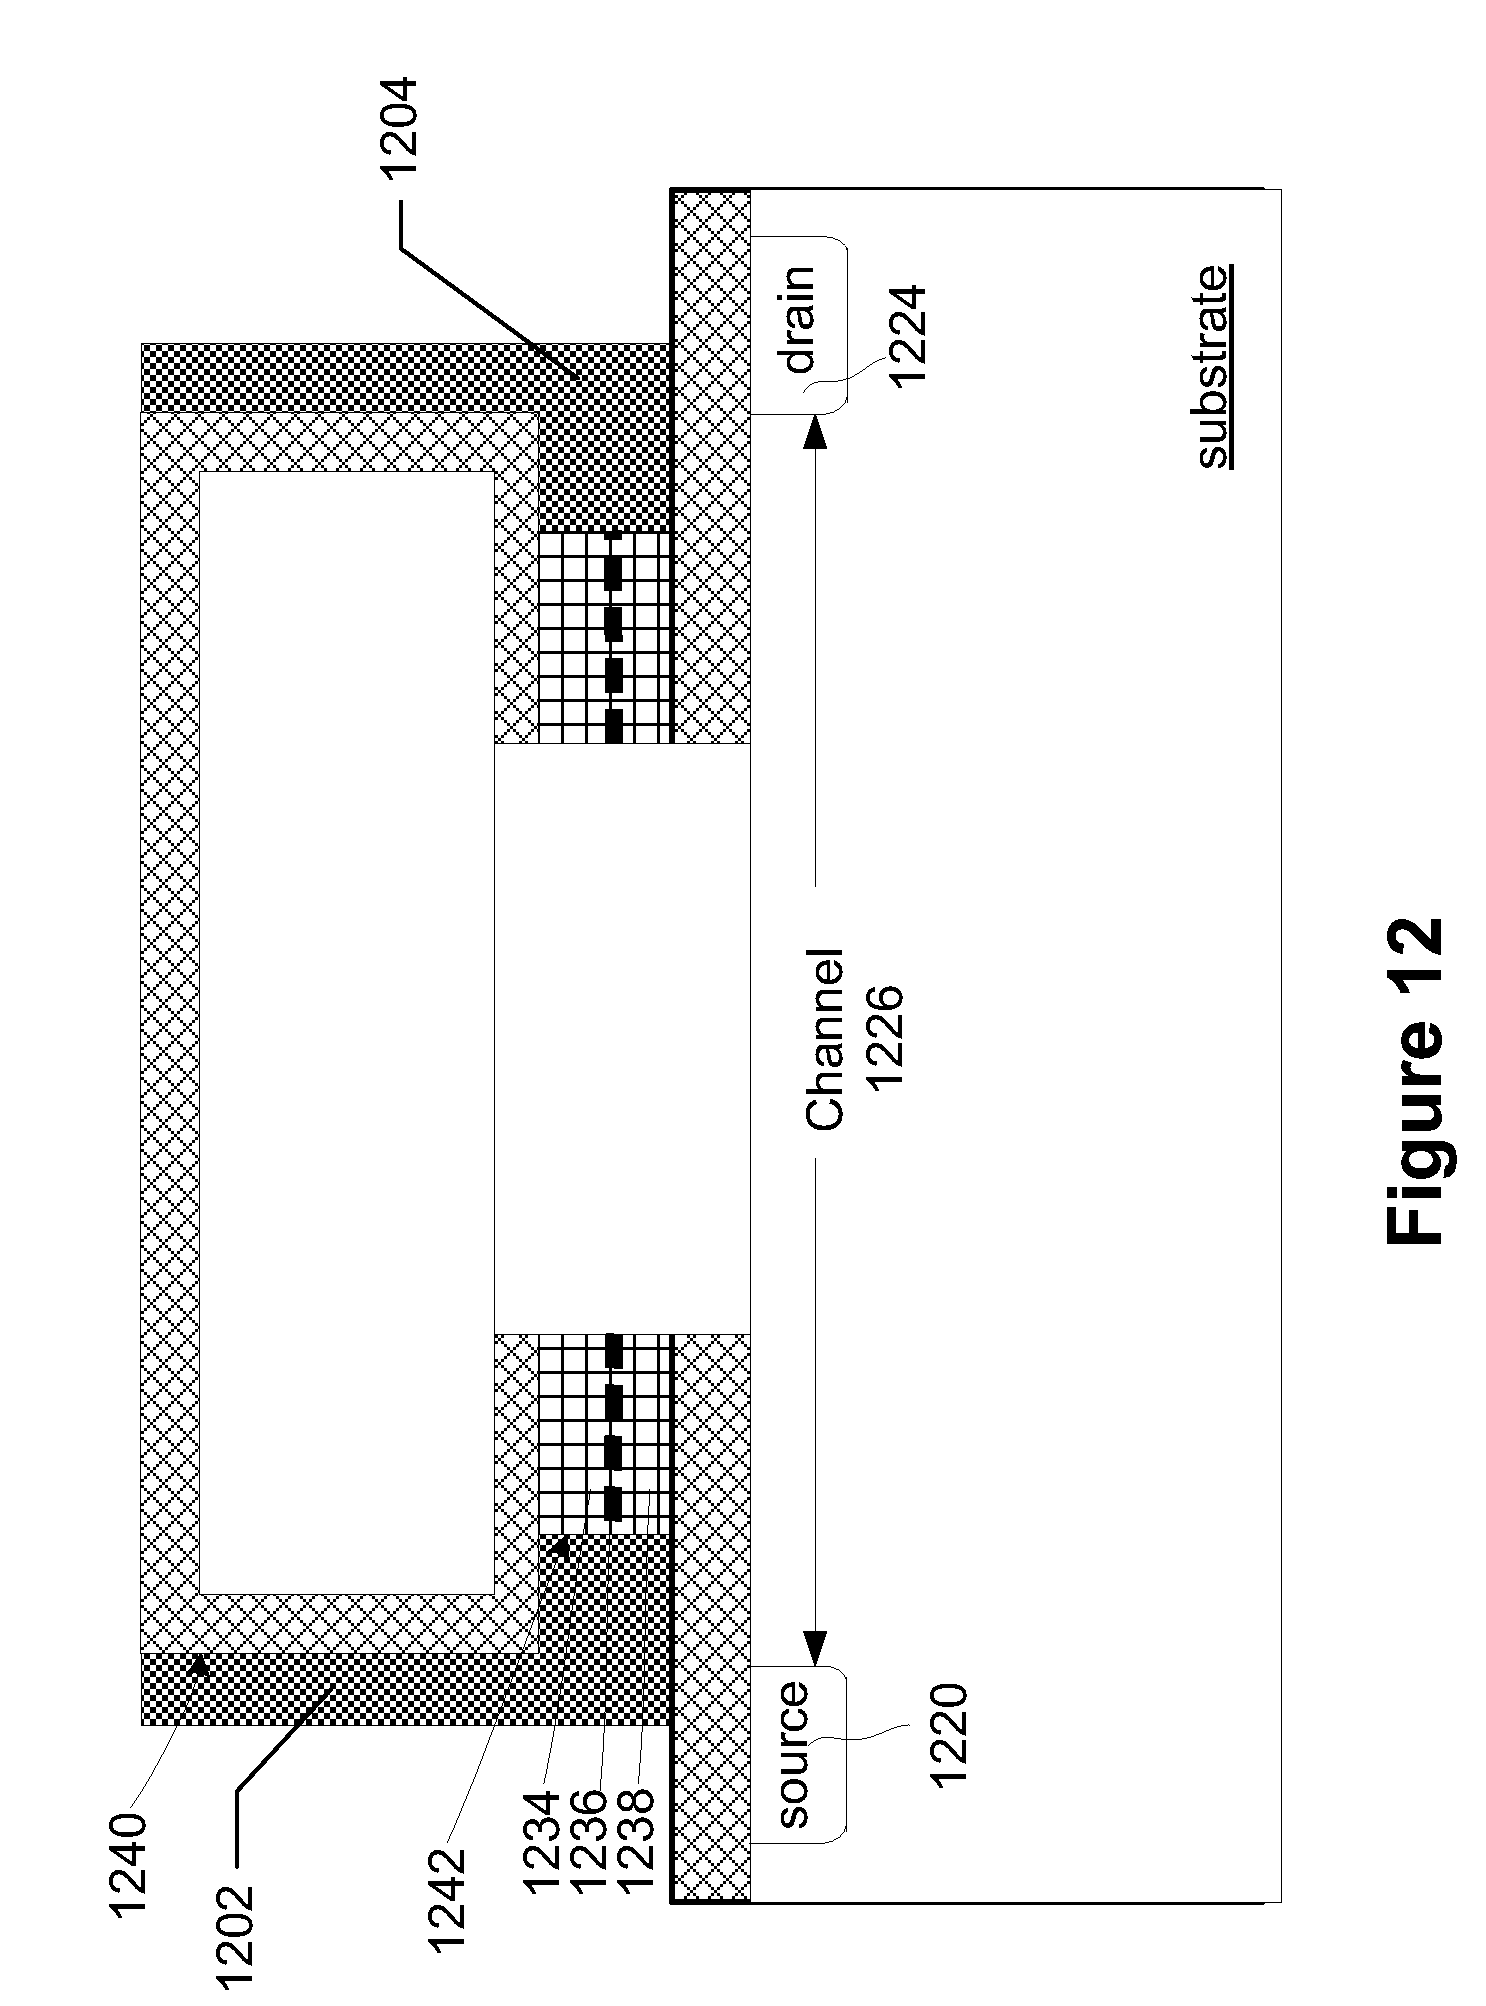 Method for manufacturing twin bit structure cell with hafnium oxide and nano-crystalline silicon layer